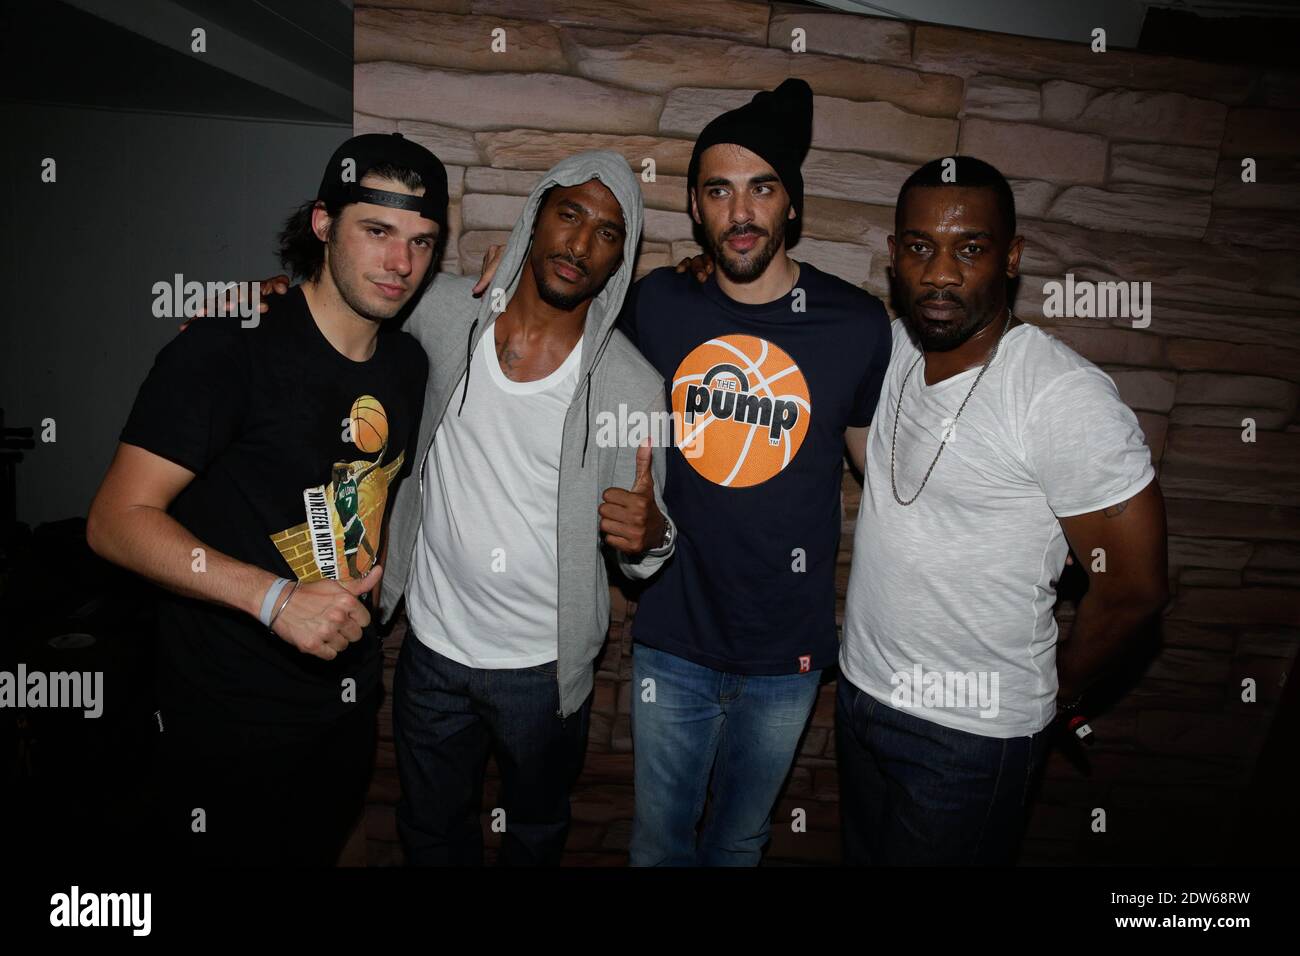 Exclusive - Orelsan, Stomy Bugsy, Gringe and Passi attending Reebok party  held at Villa Schweppes during the 67th Cannes Film Festival in Cannes,  France on May 16, 2014. Photo by Jerome Domine/ABACAPRESS.COM